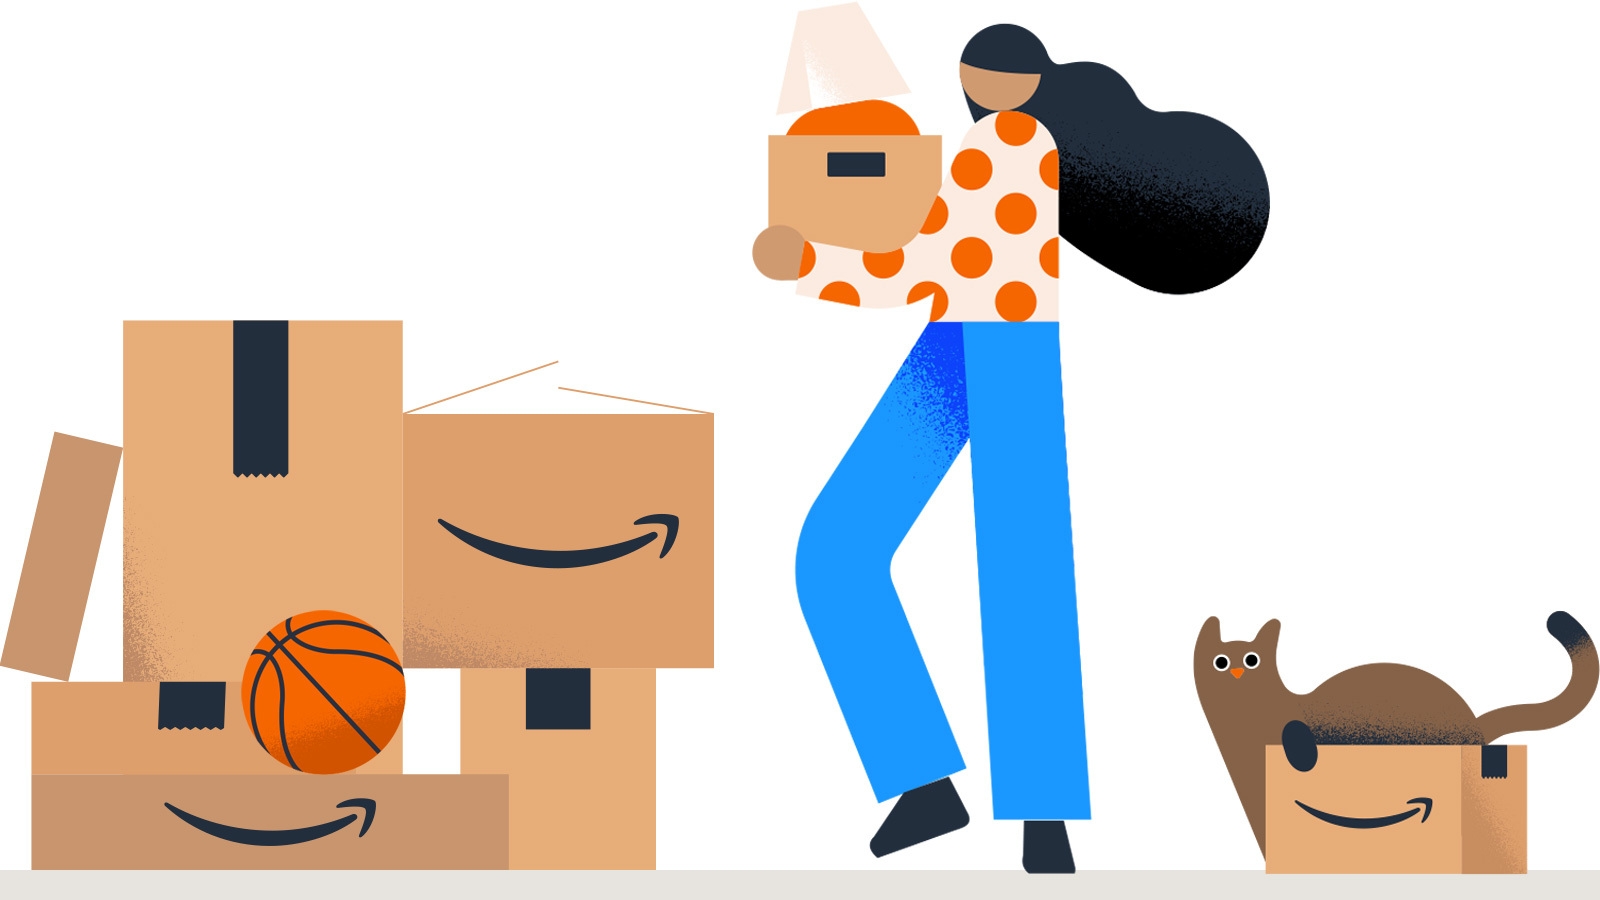 An illustration of a person packing up Amazon boxes with household items.